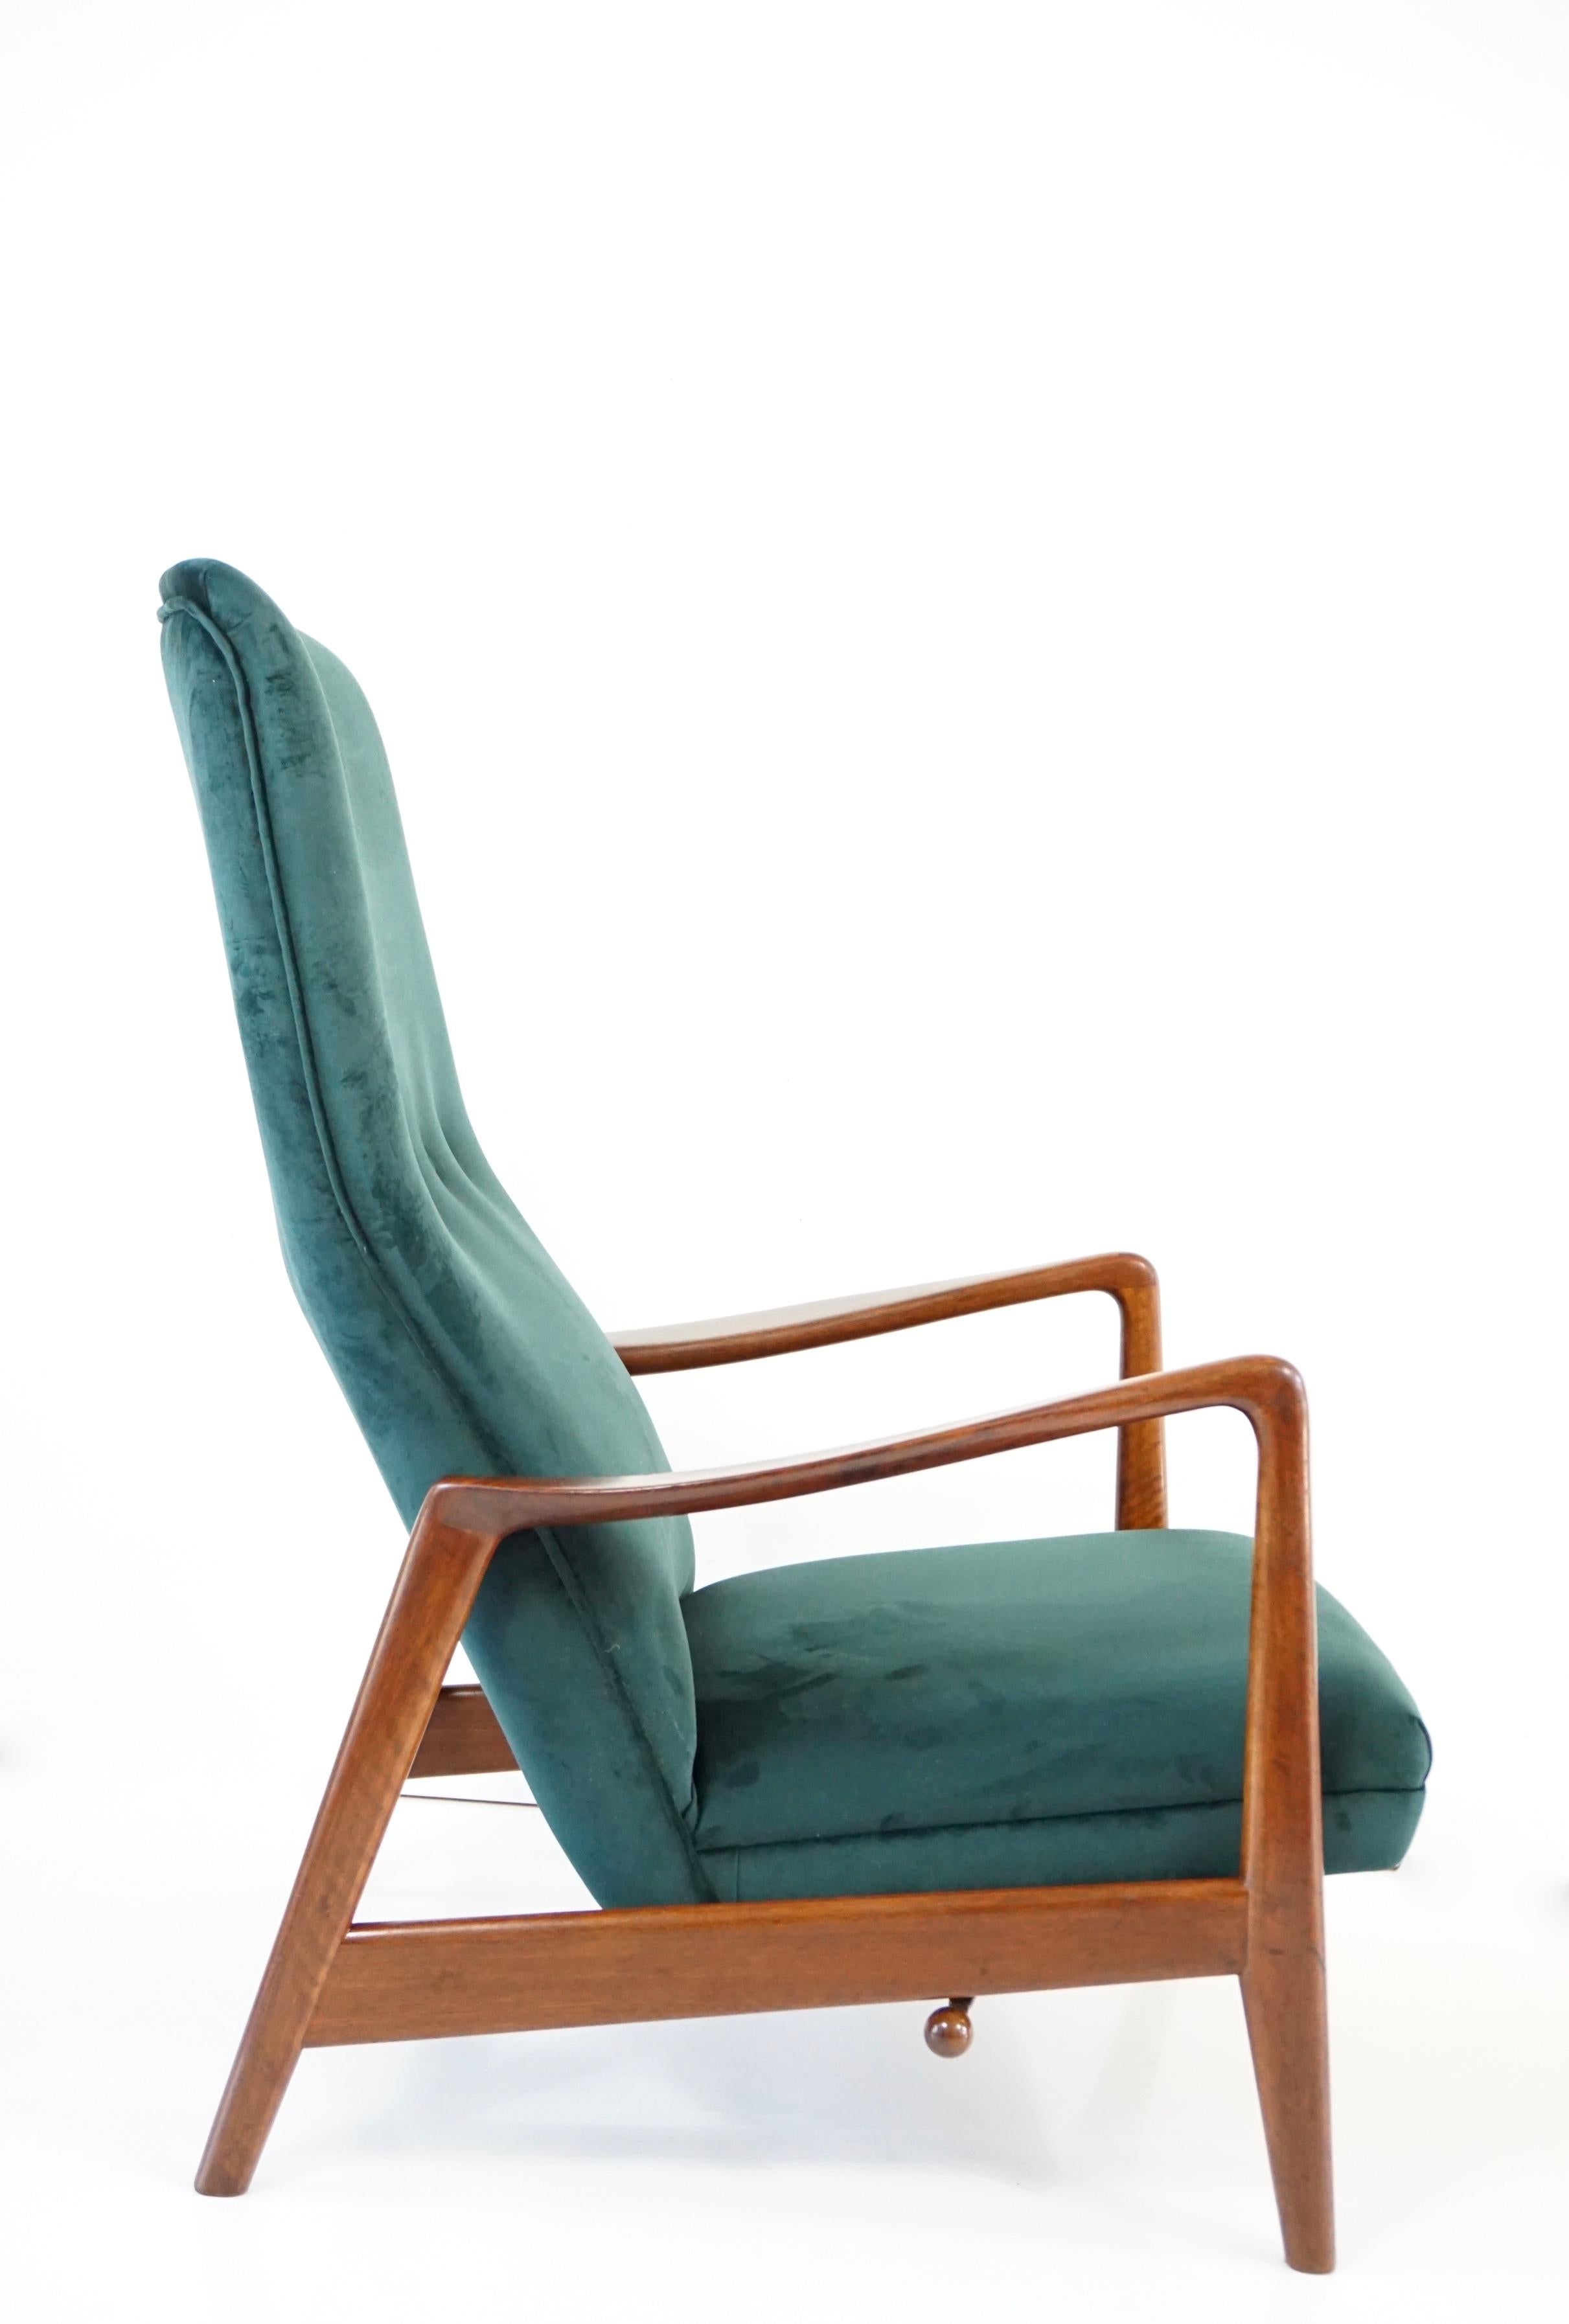 Mid-20th Century Lounge Chair N.829 by Cassina Sel. by Gio Ponti for the Hotel Pdp Sorrento, 1964